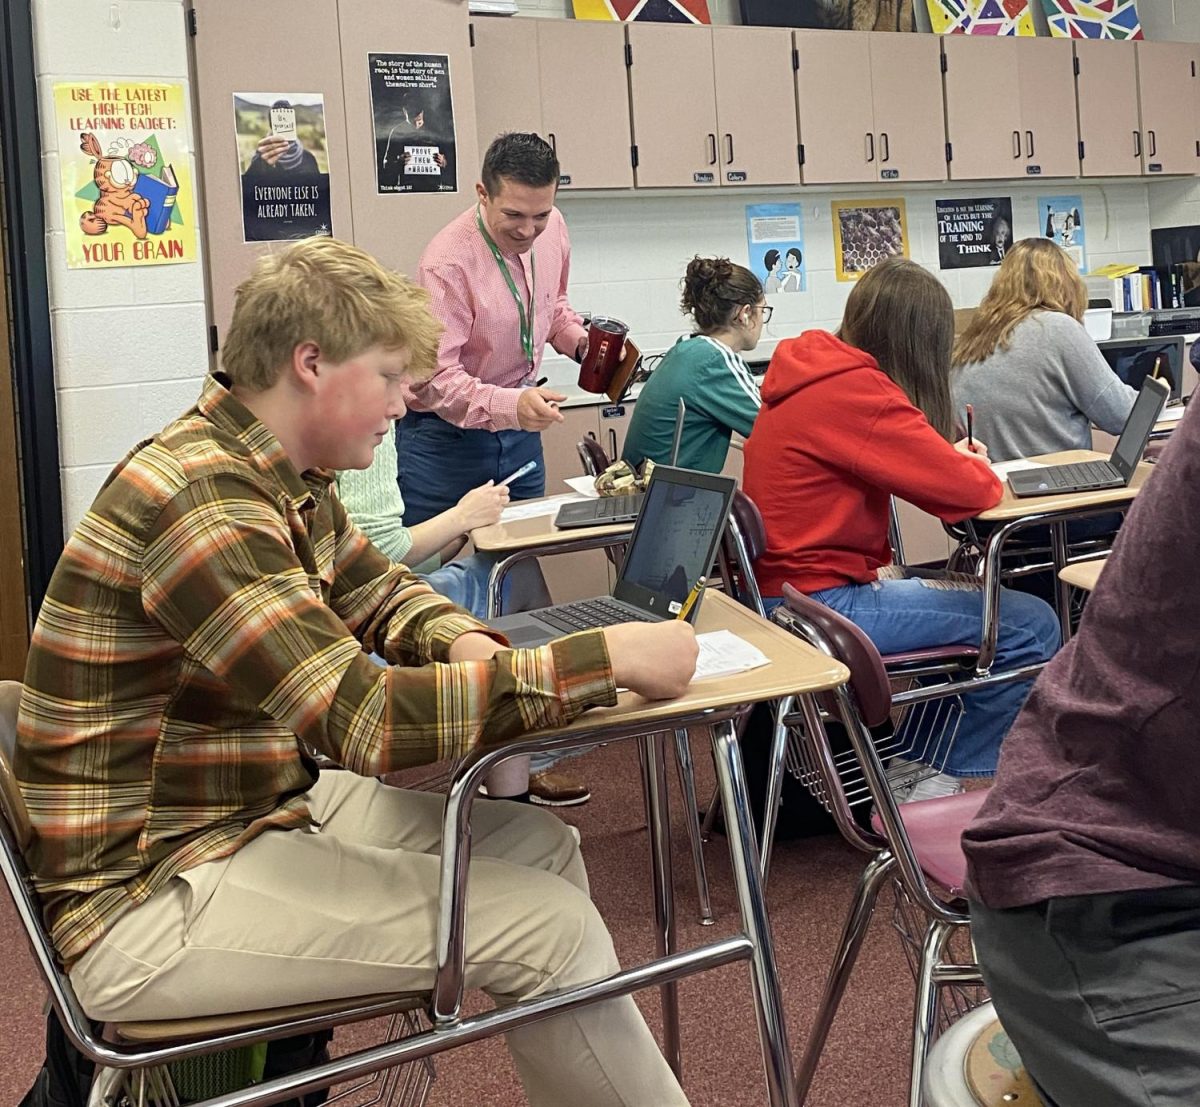 New assistant principal Kurt Schommer makes his rounds through the classrooms. Schommer checked in with students about their learning and observed the class activities. 